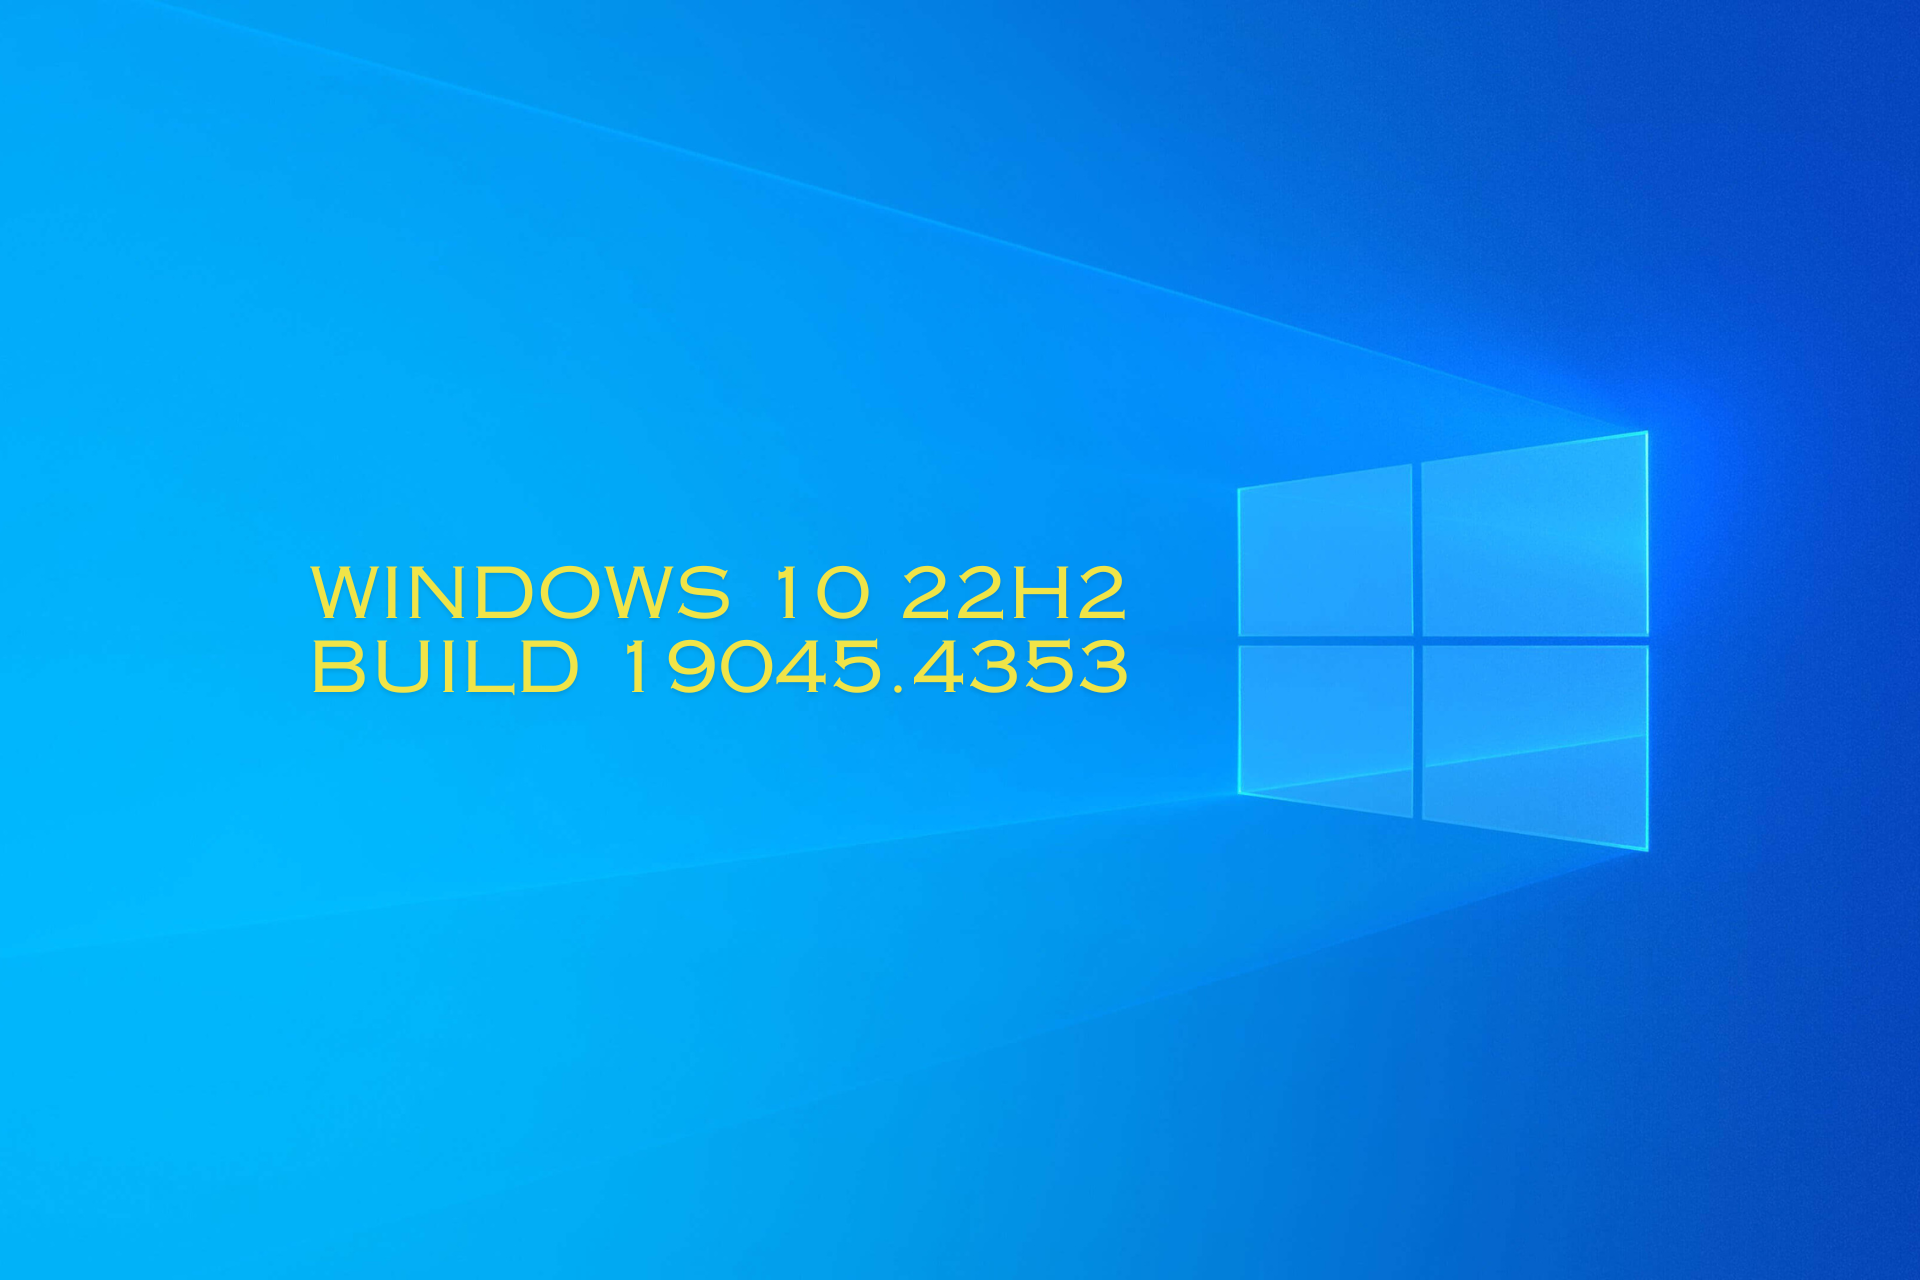 Windows 10 22H2 Build 19045.4353 brings  account-related notifications